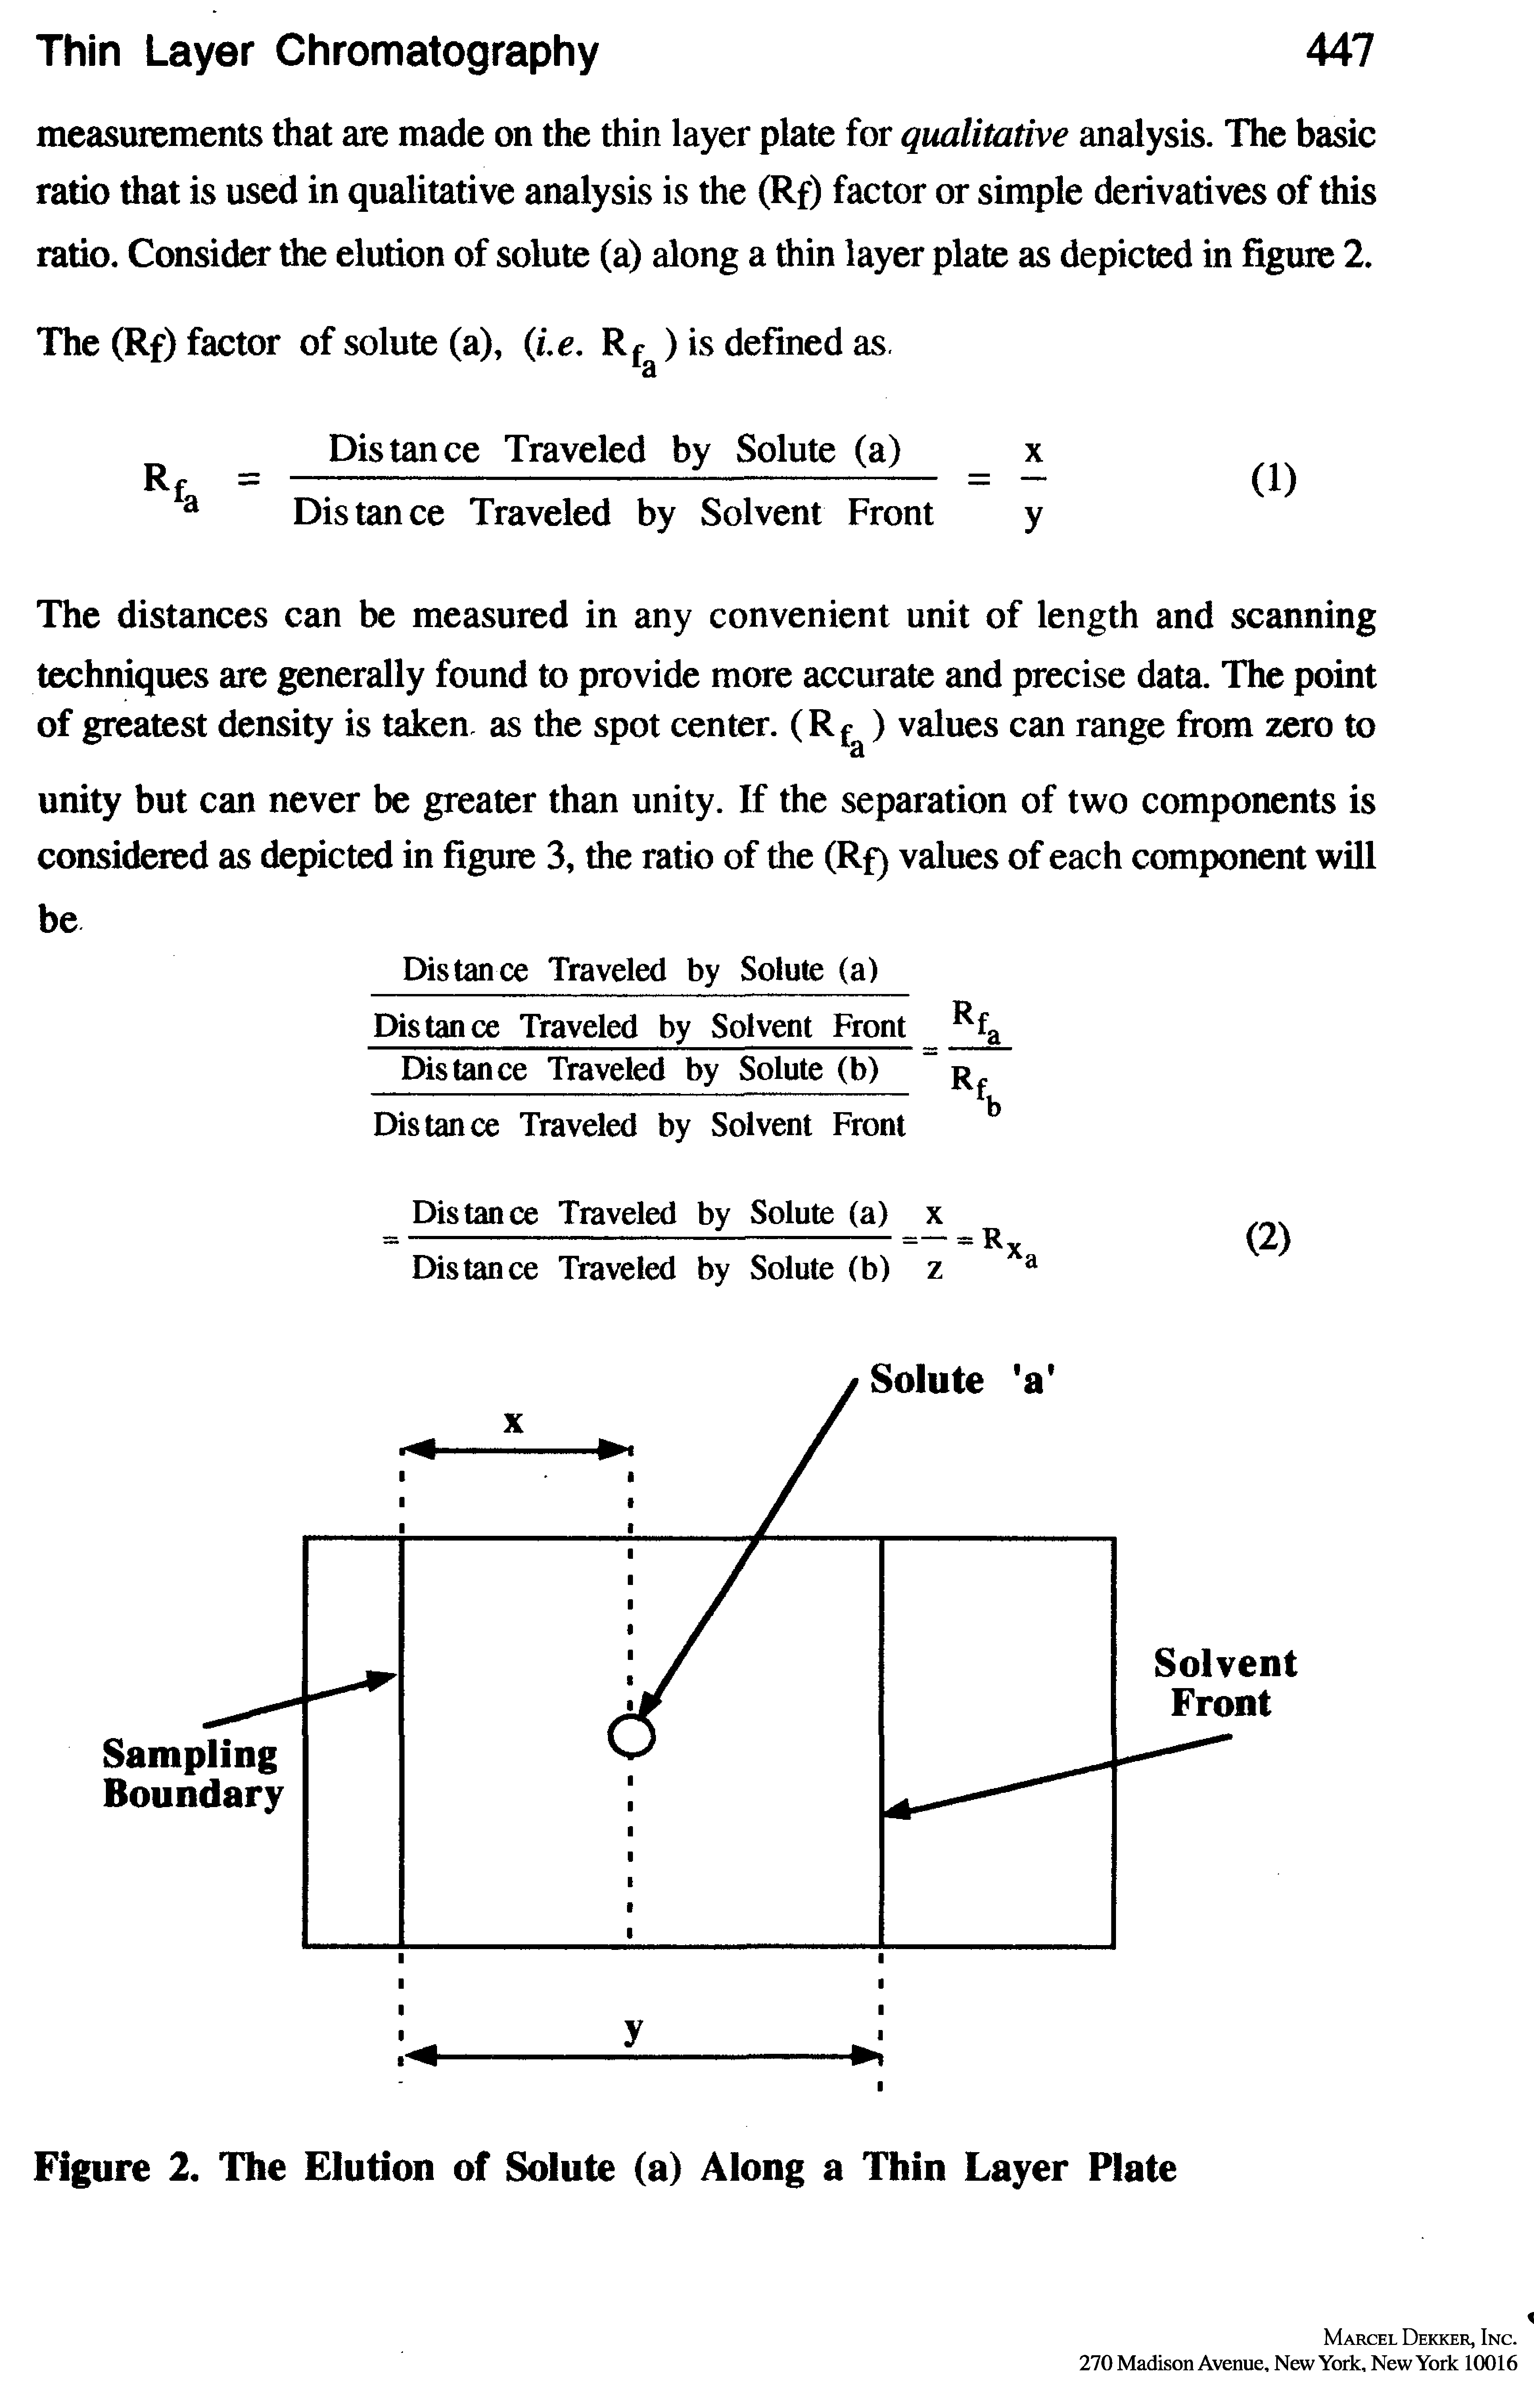 Figure 2. The Elution of Solute (a) Along a Thin Layer Plate...